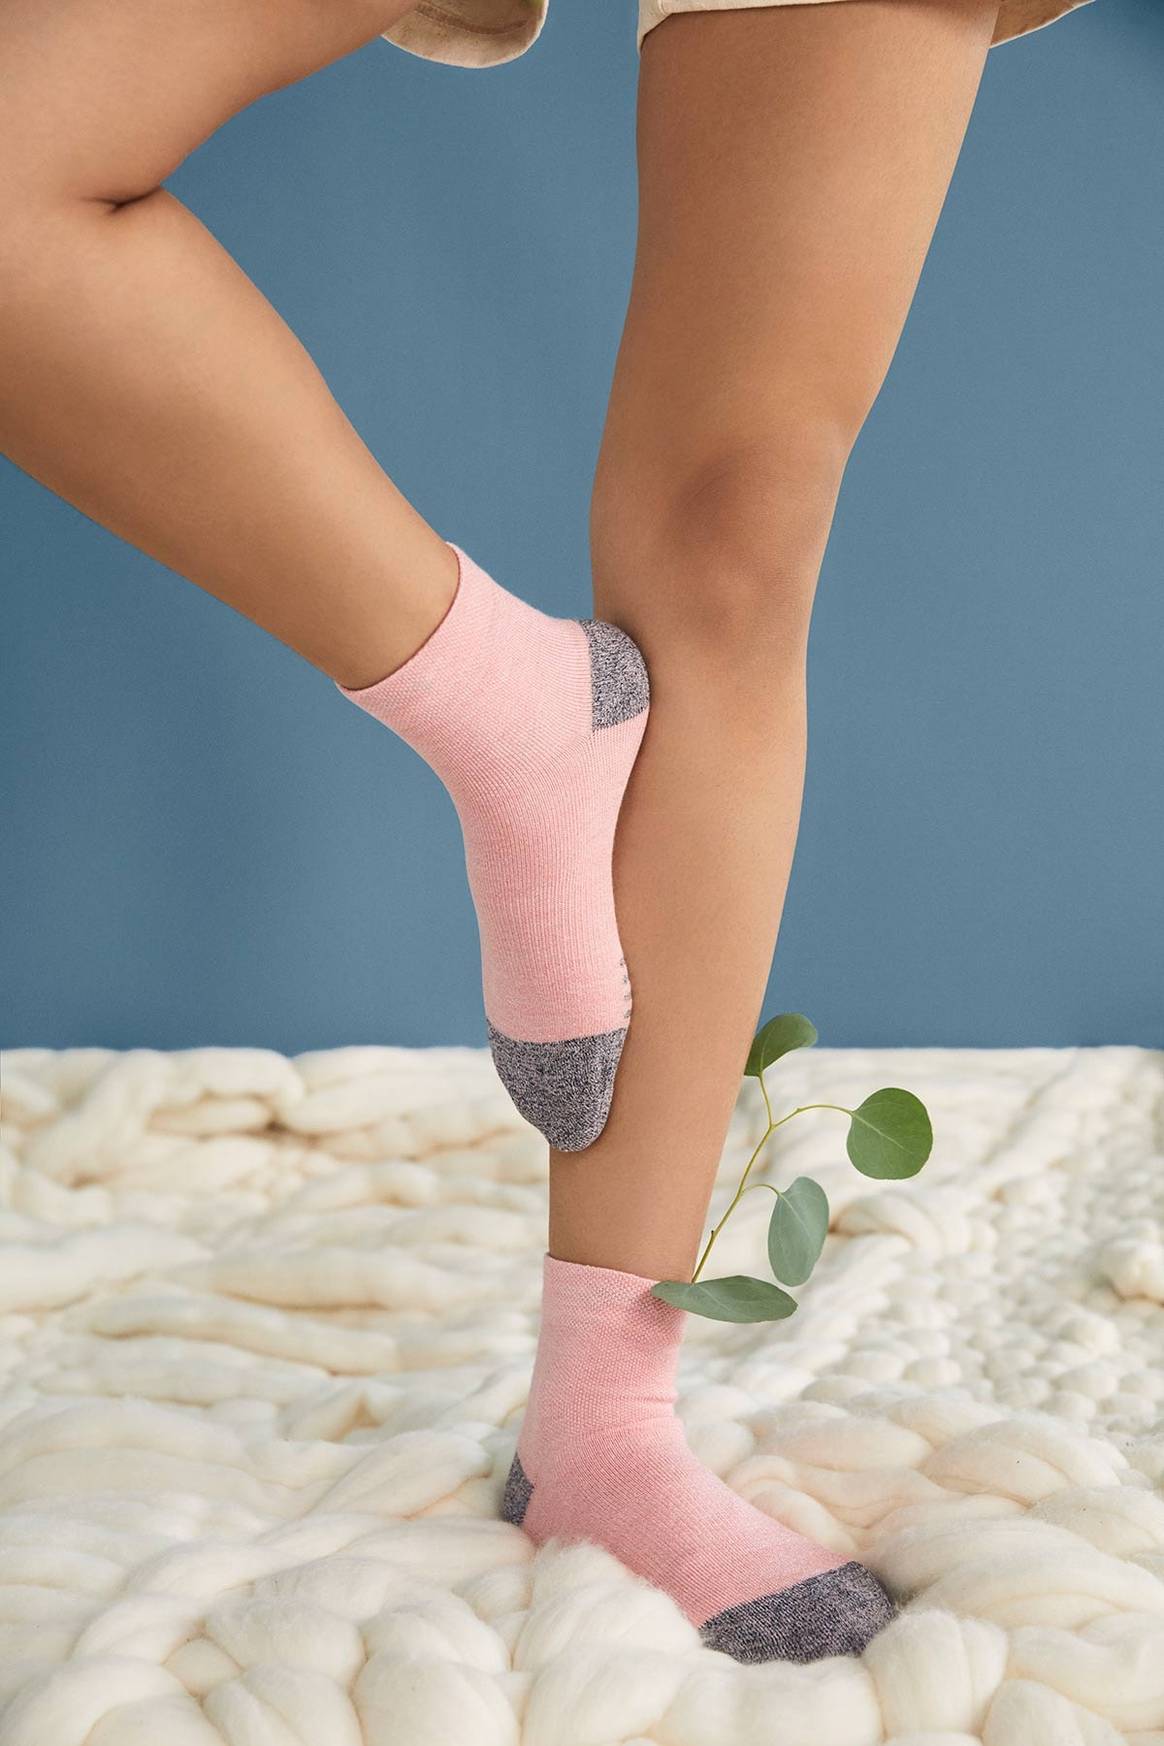 Allbirds launches socks with brand new material